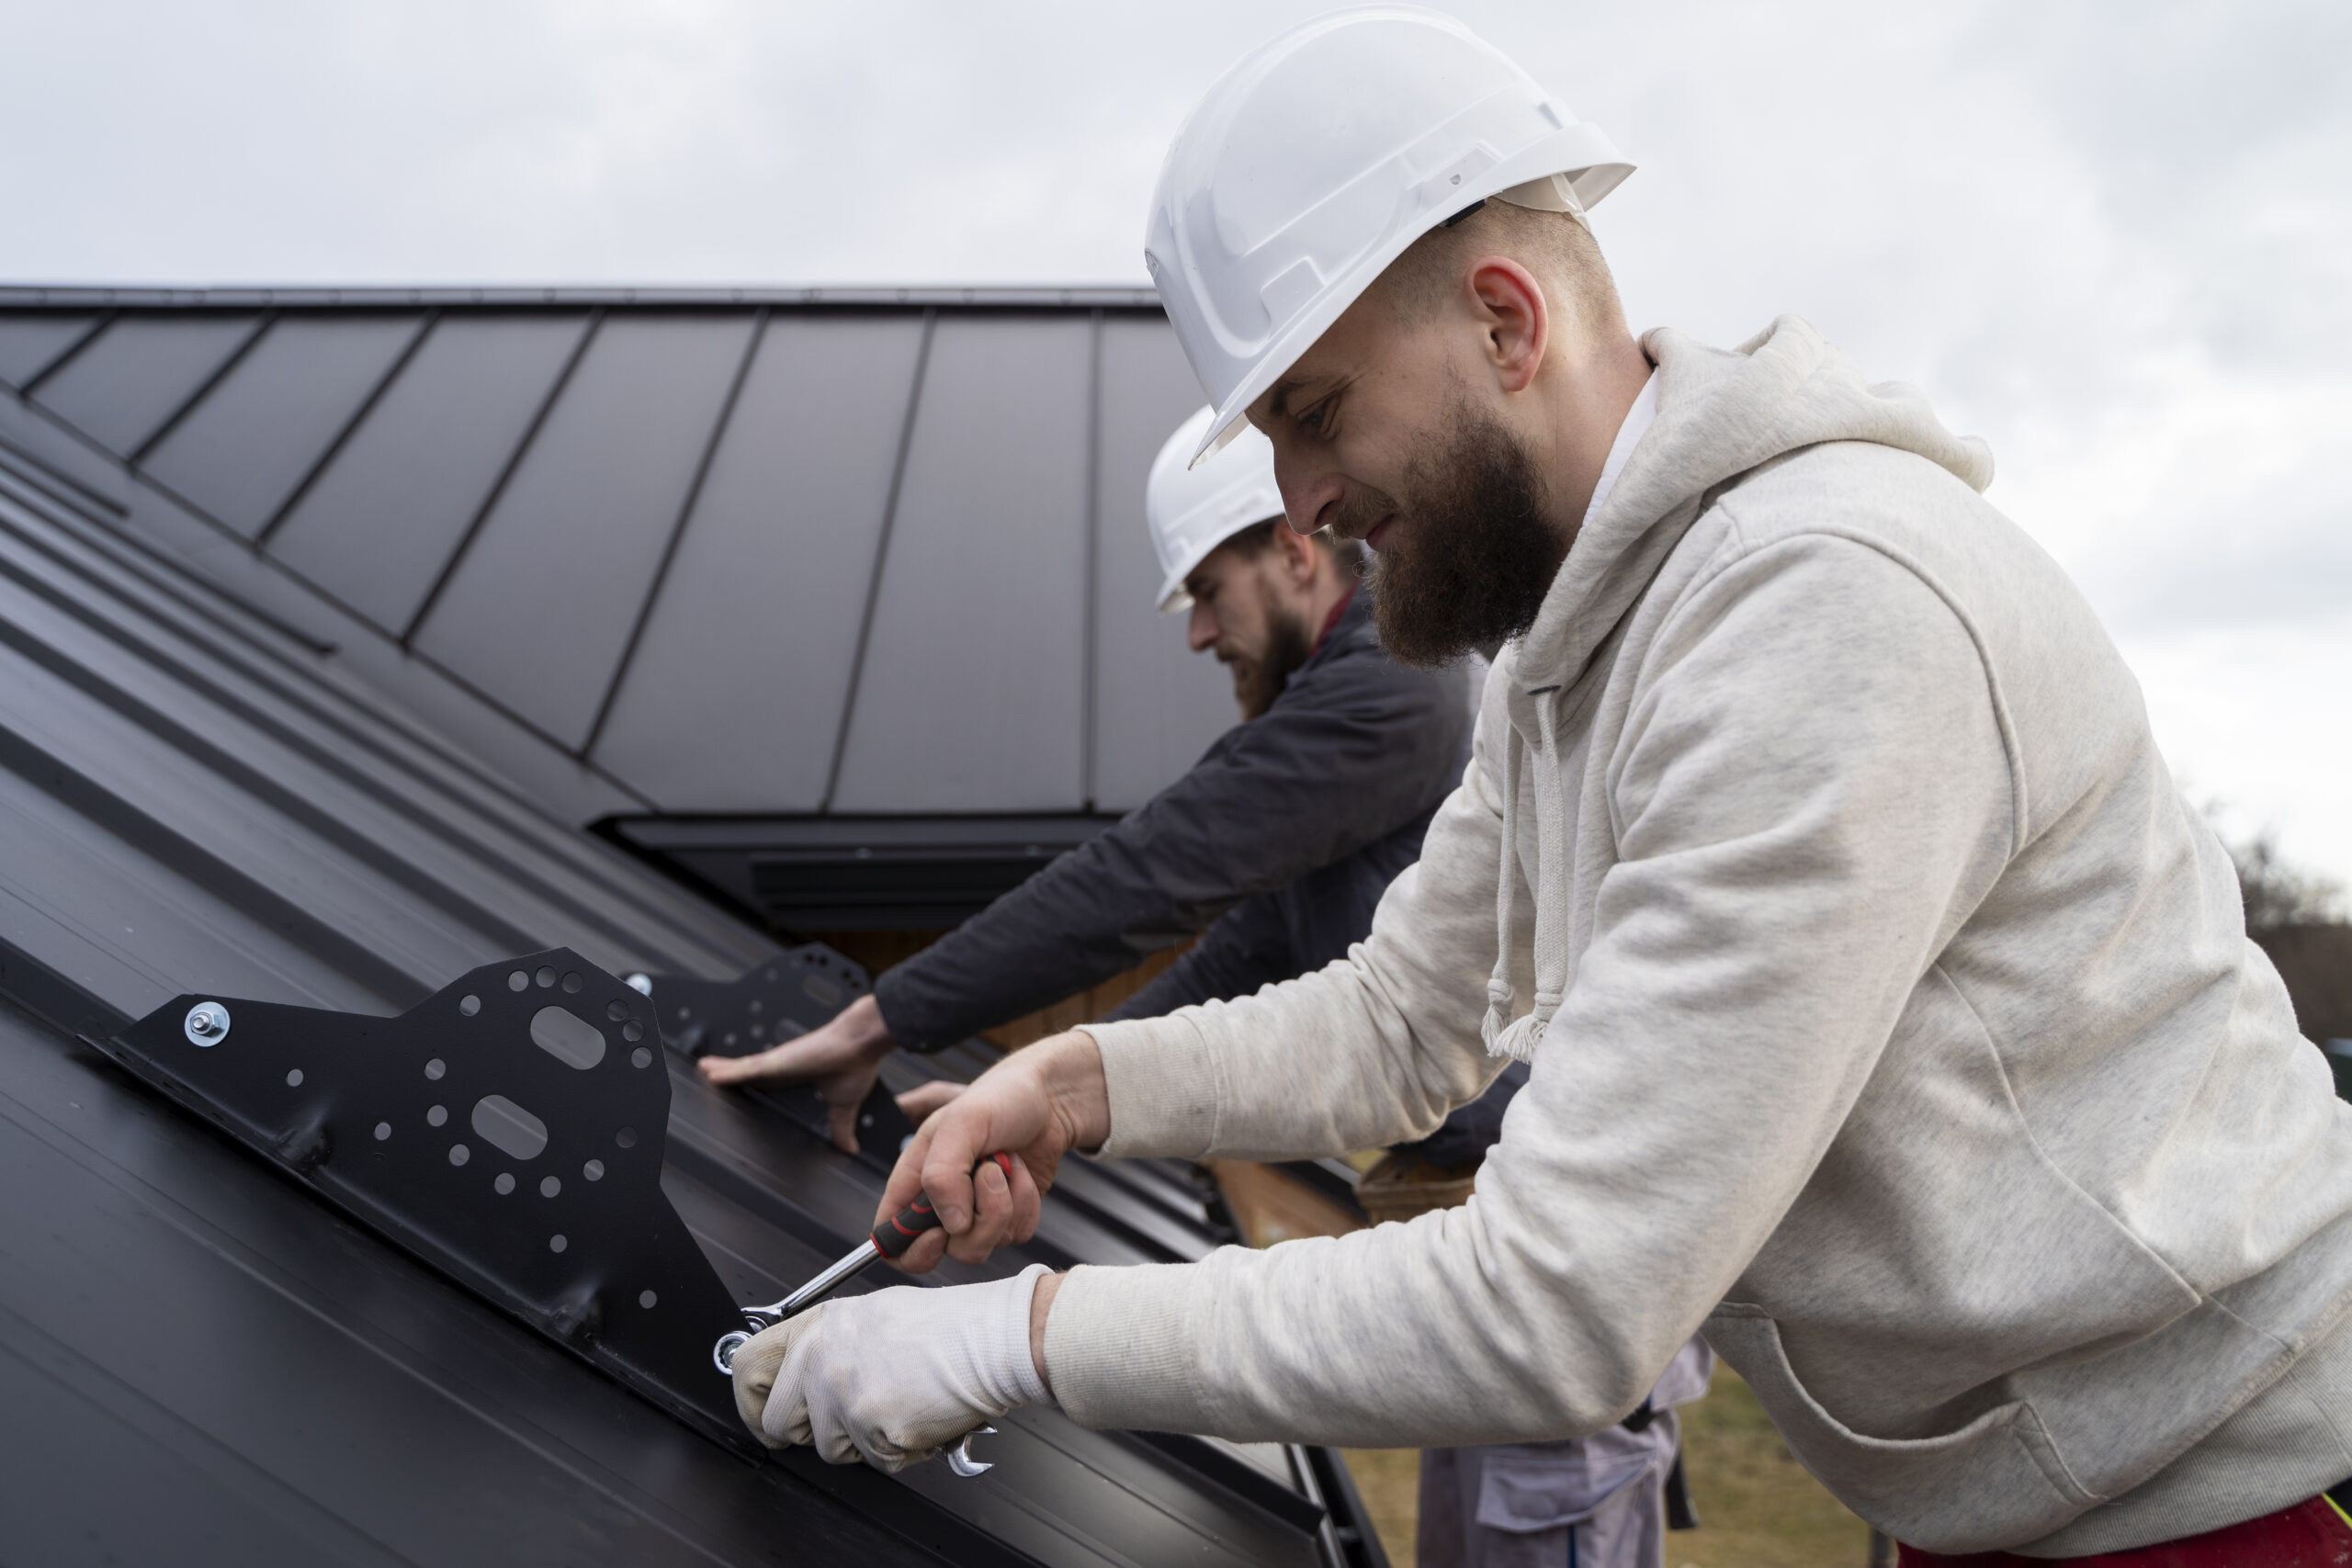 12 Tips to Replacing Your Industrial Roofing the Right Way On Any Budget